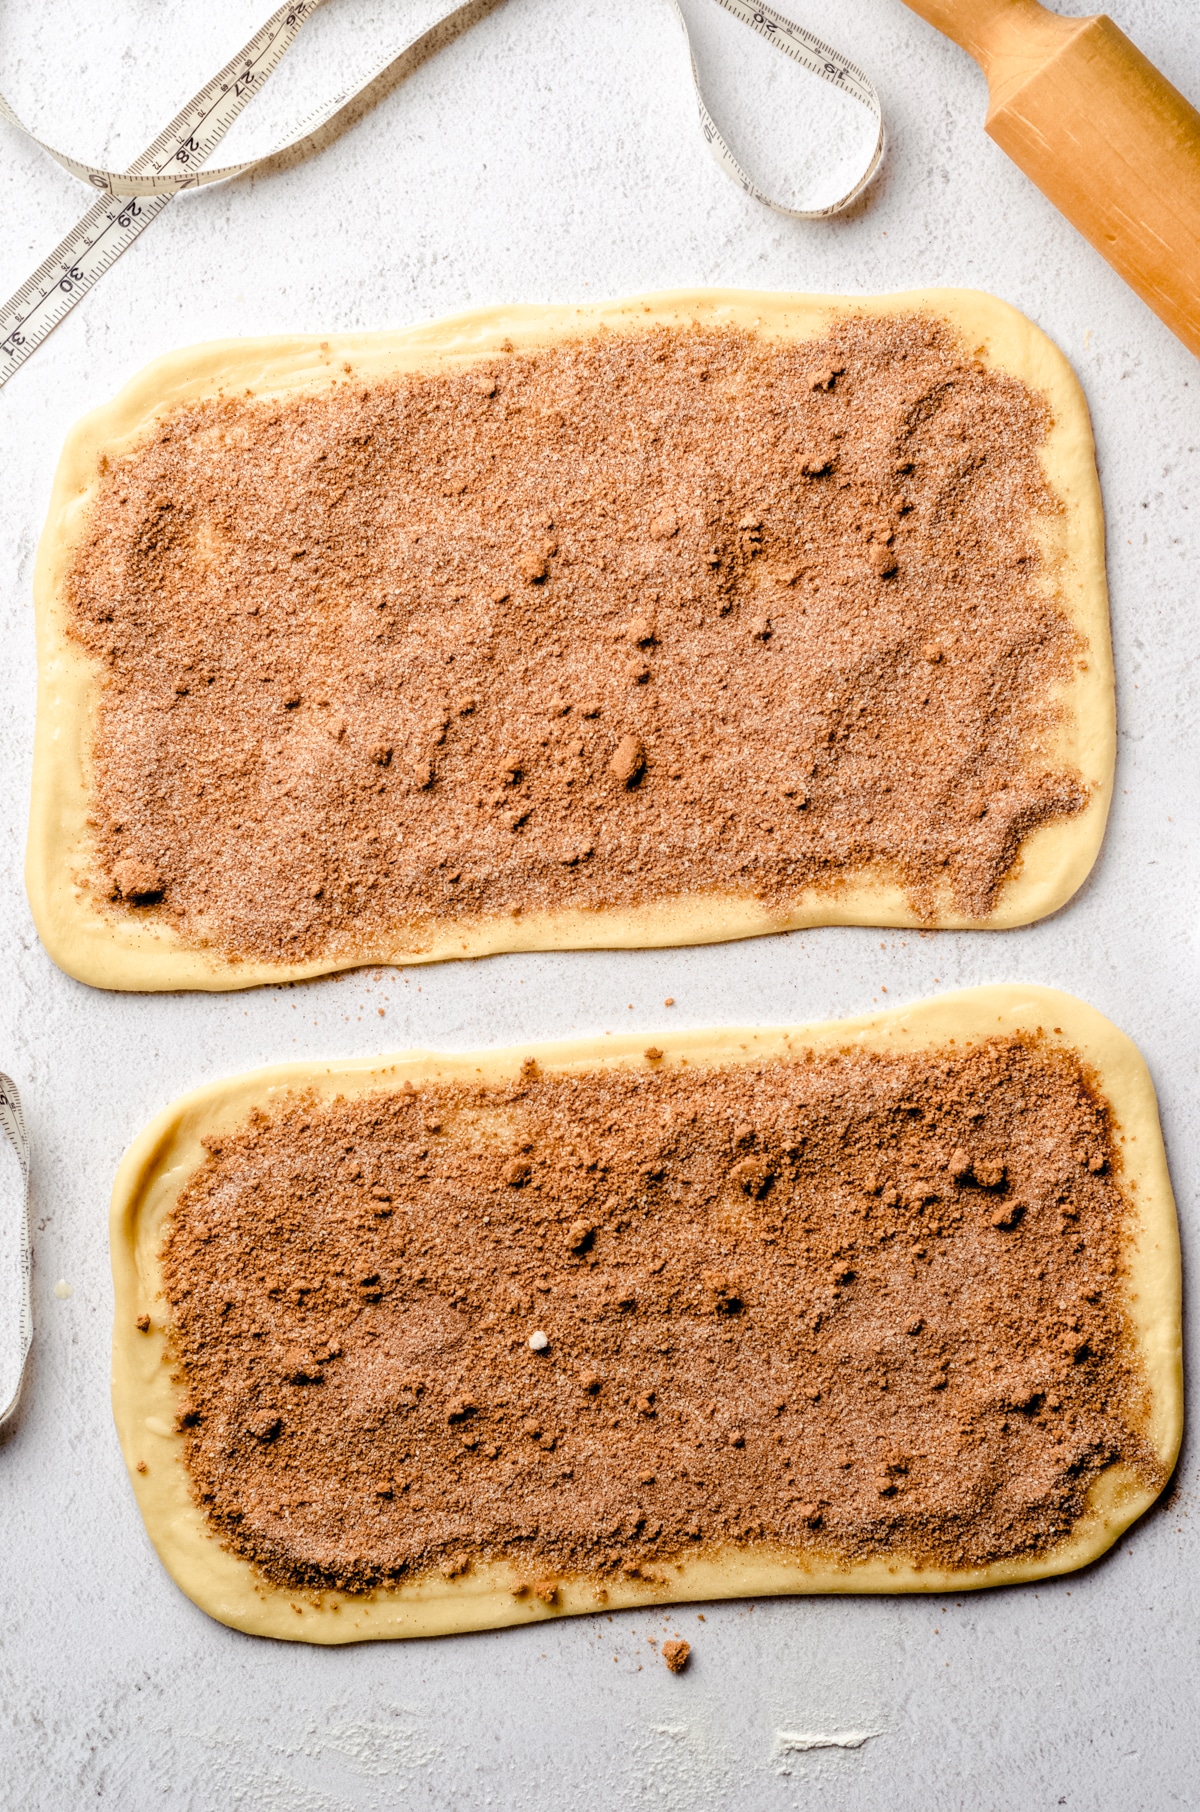 Two rectangles of cinnamon roll dough with filling spread onto them.